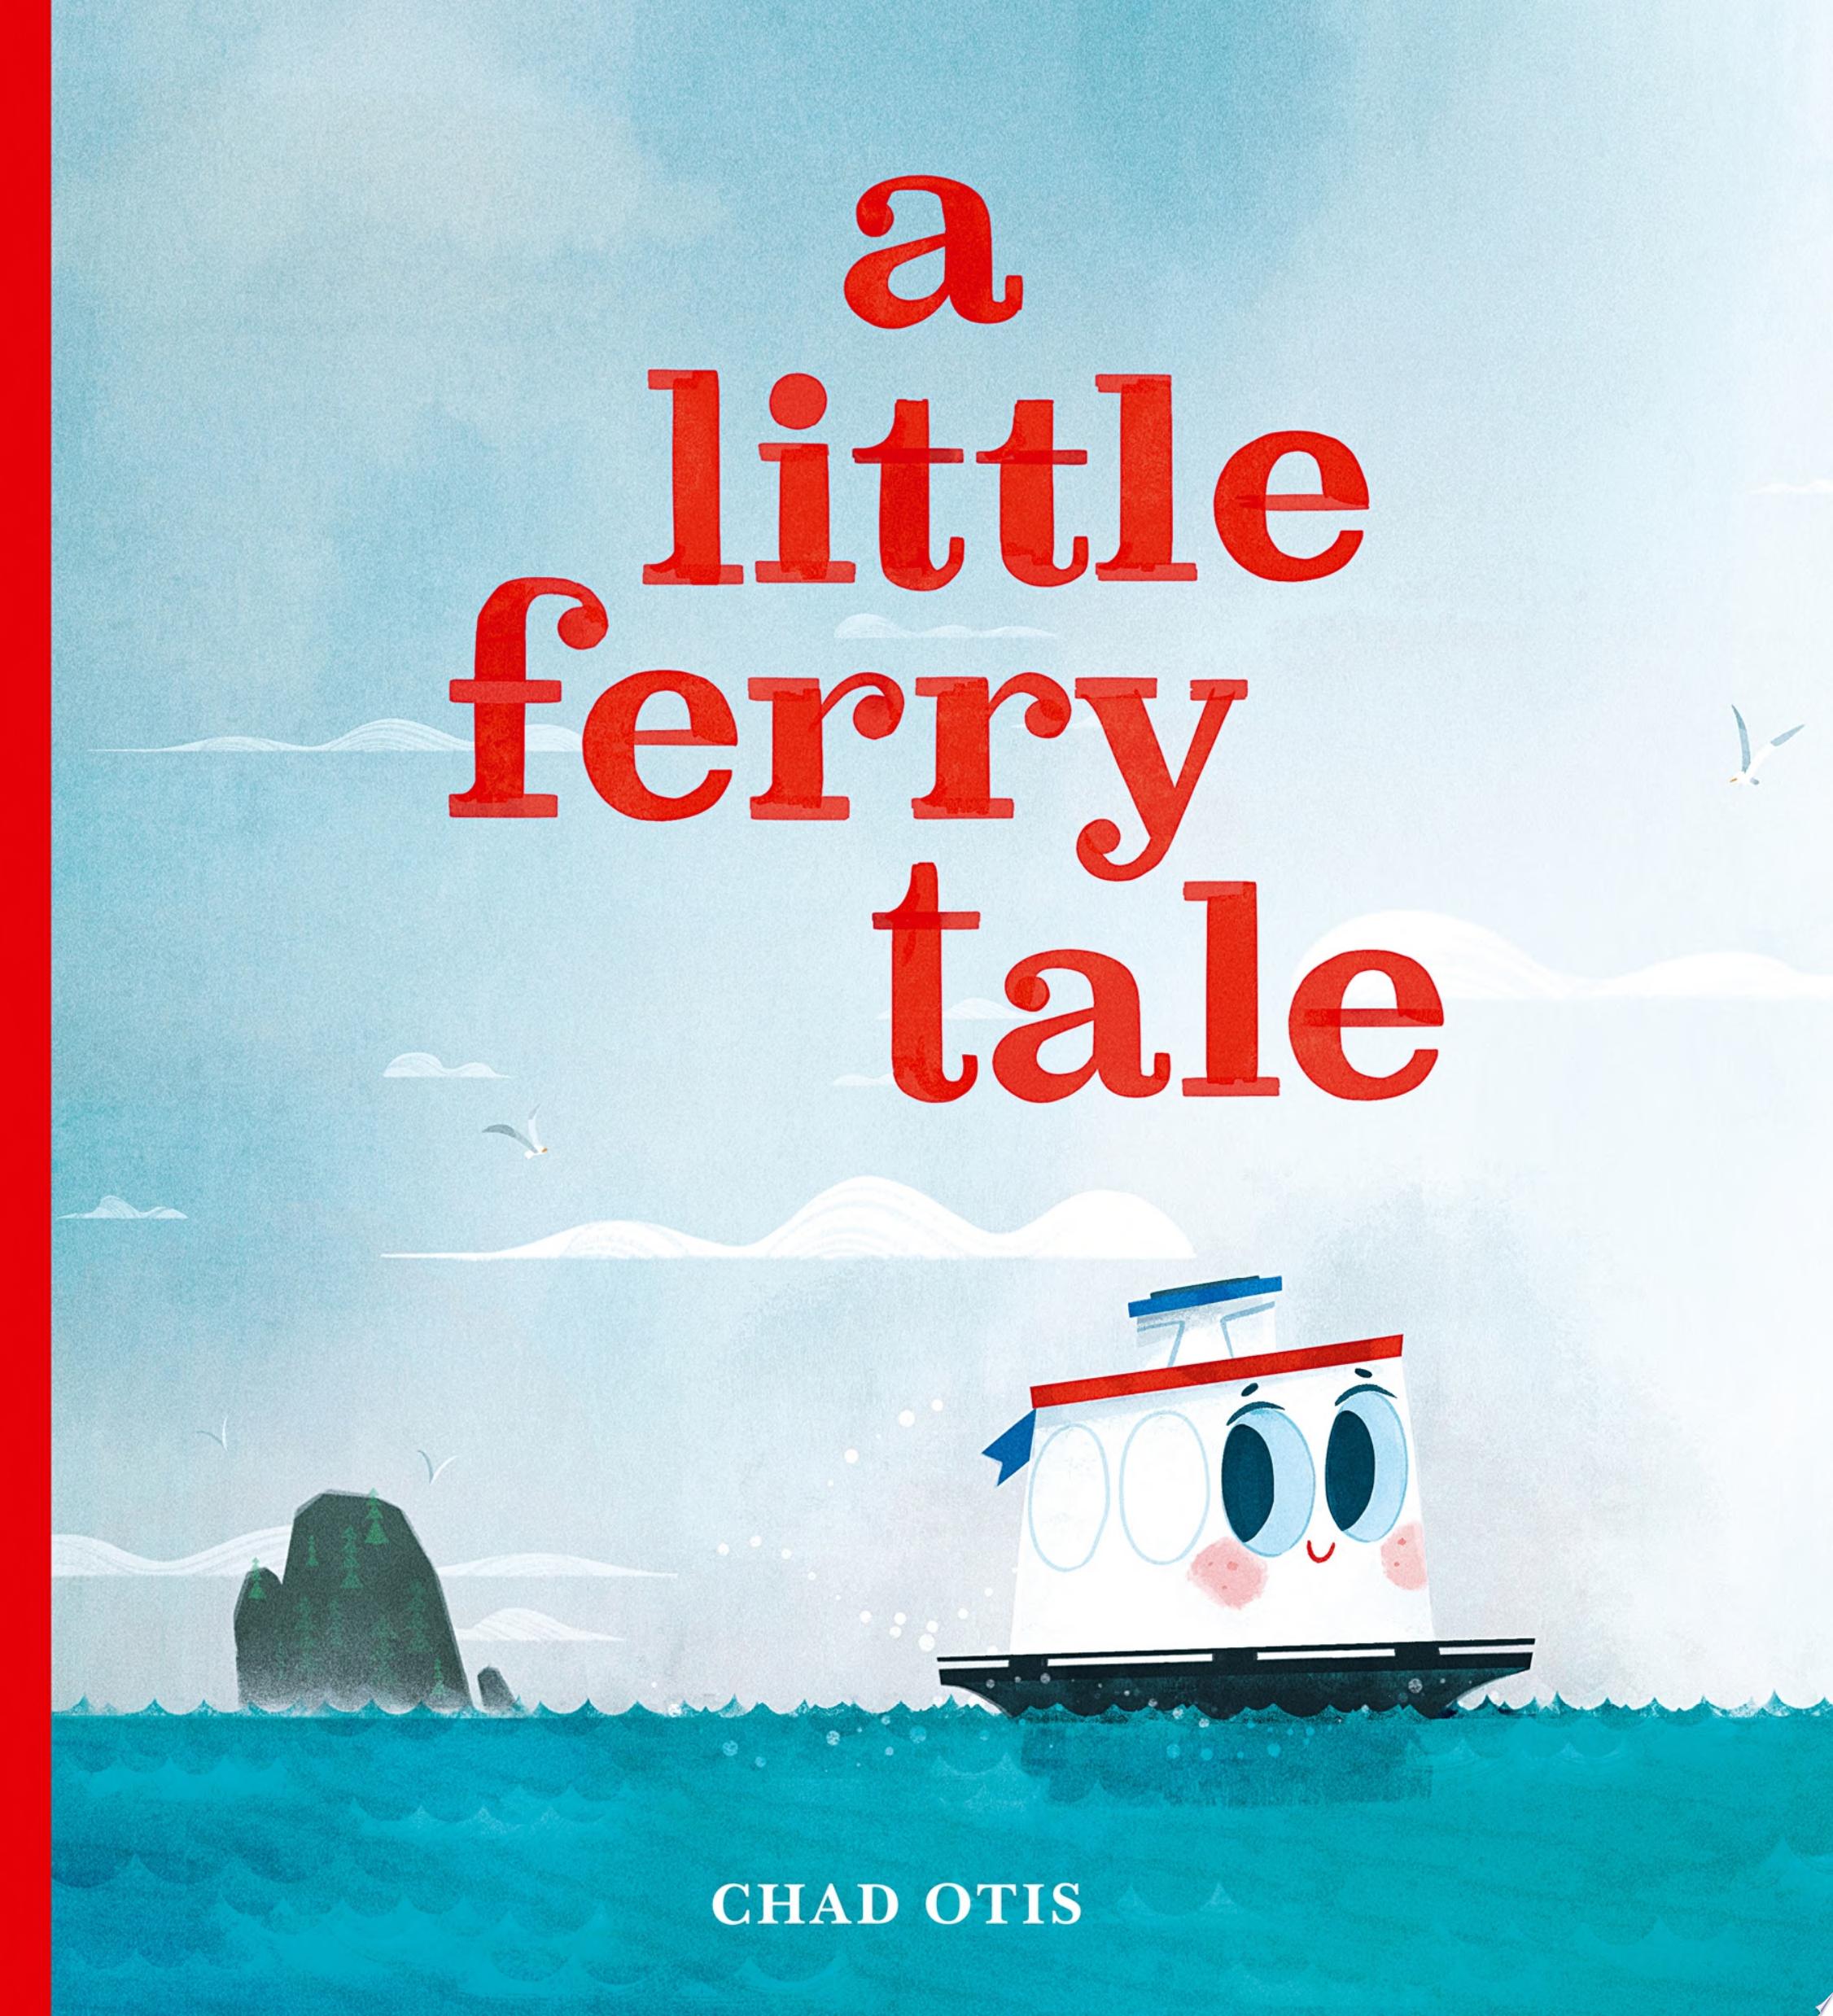 Image for "A Little Ferry Tale"